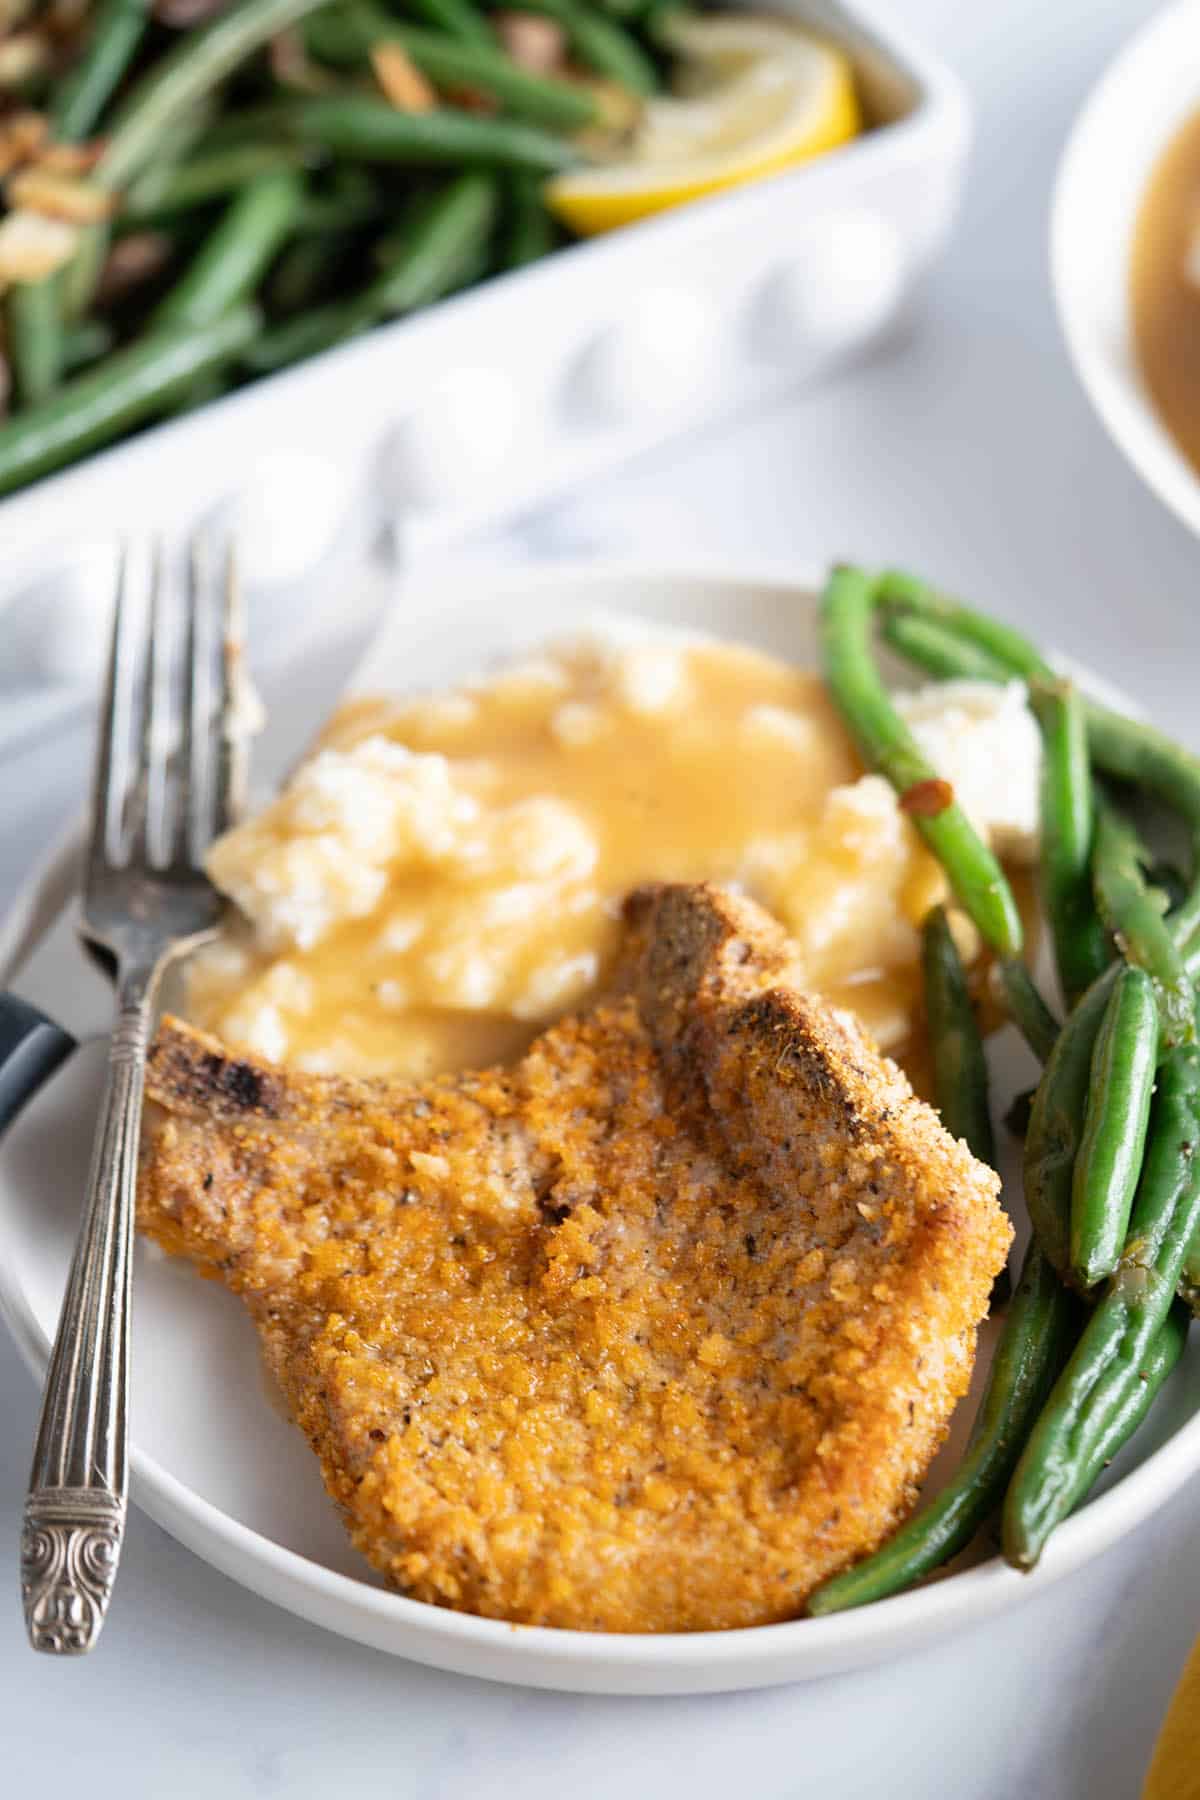 Crispy pork chop on a plate, served with green beans and mashed potatoes with gravy.